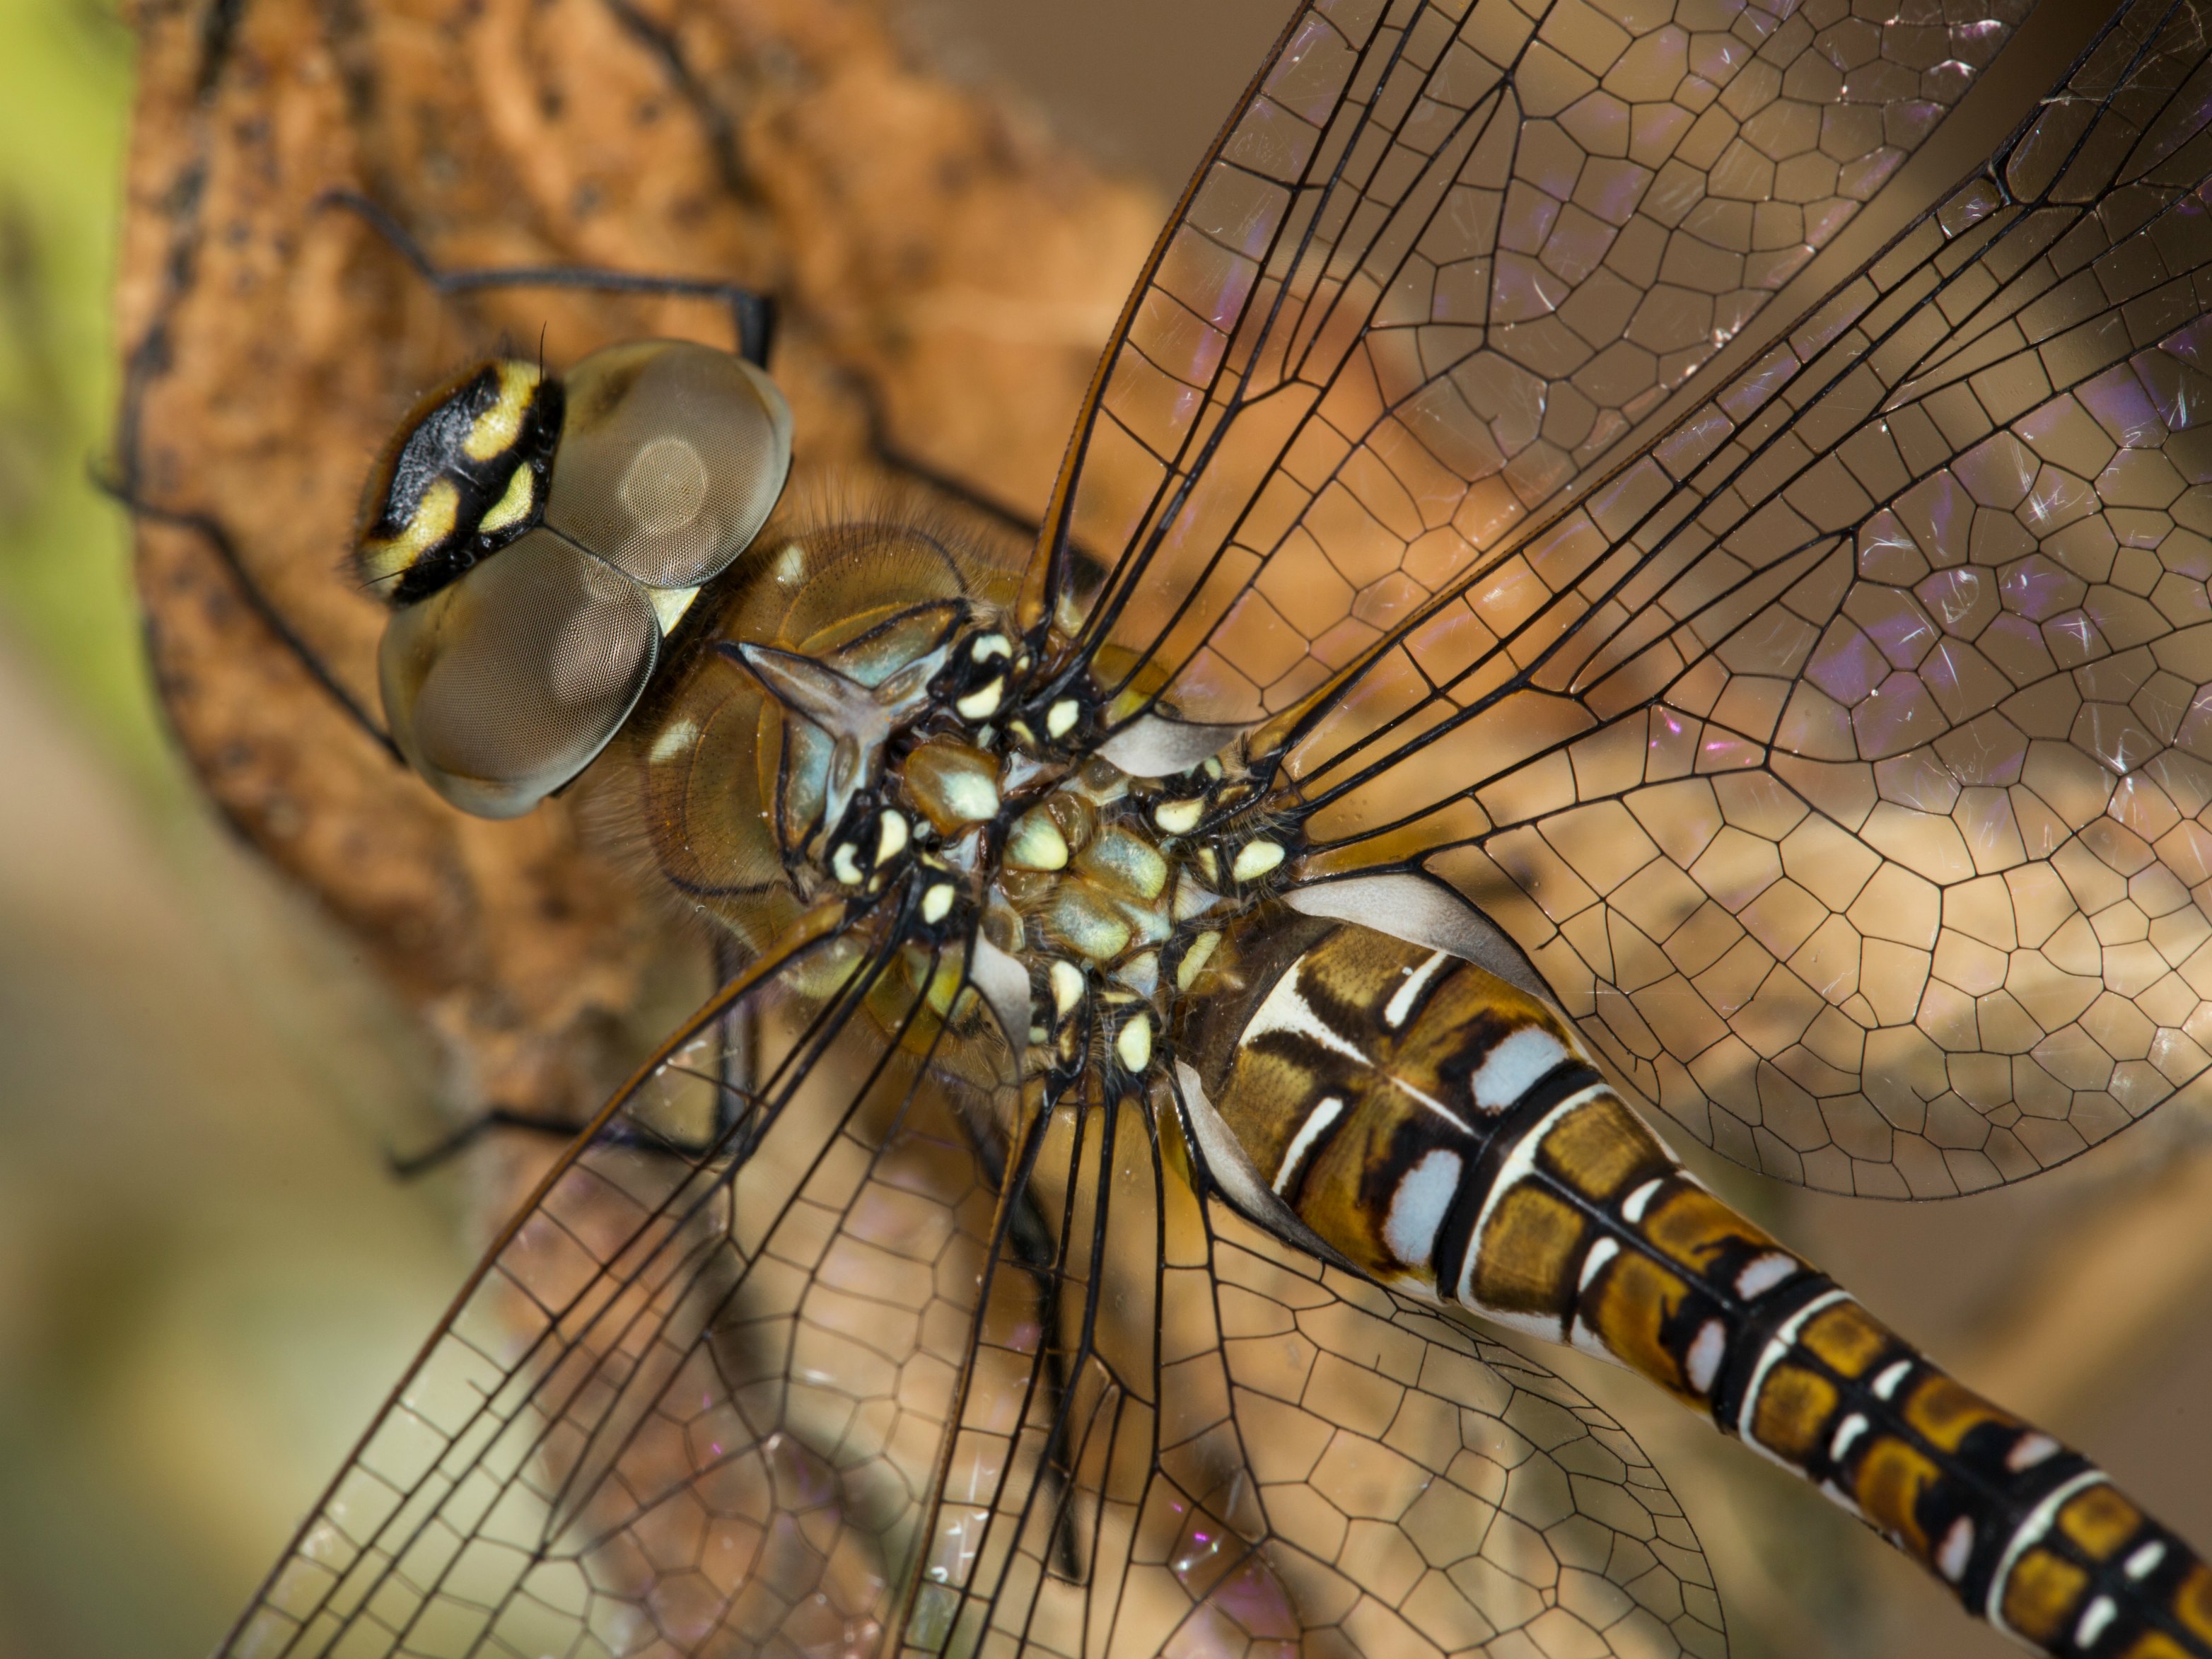 Nature-Up-Close-winner-overall-winner-Migrant-Hawker-Dragonfly-Image-Credit-Marcus-Kidd